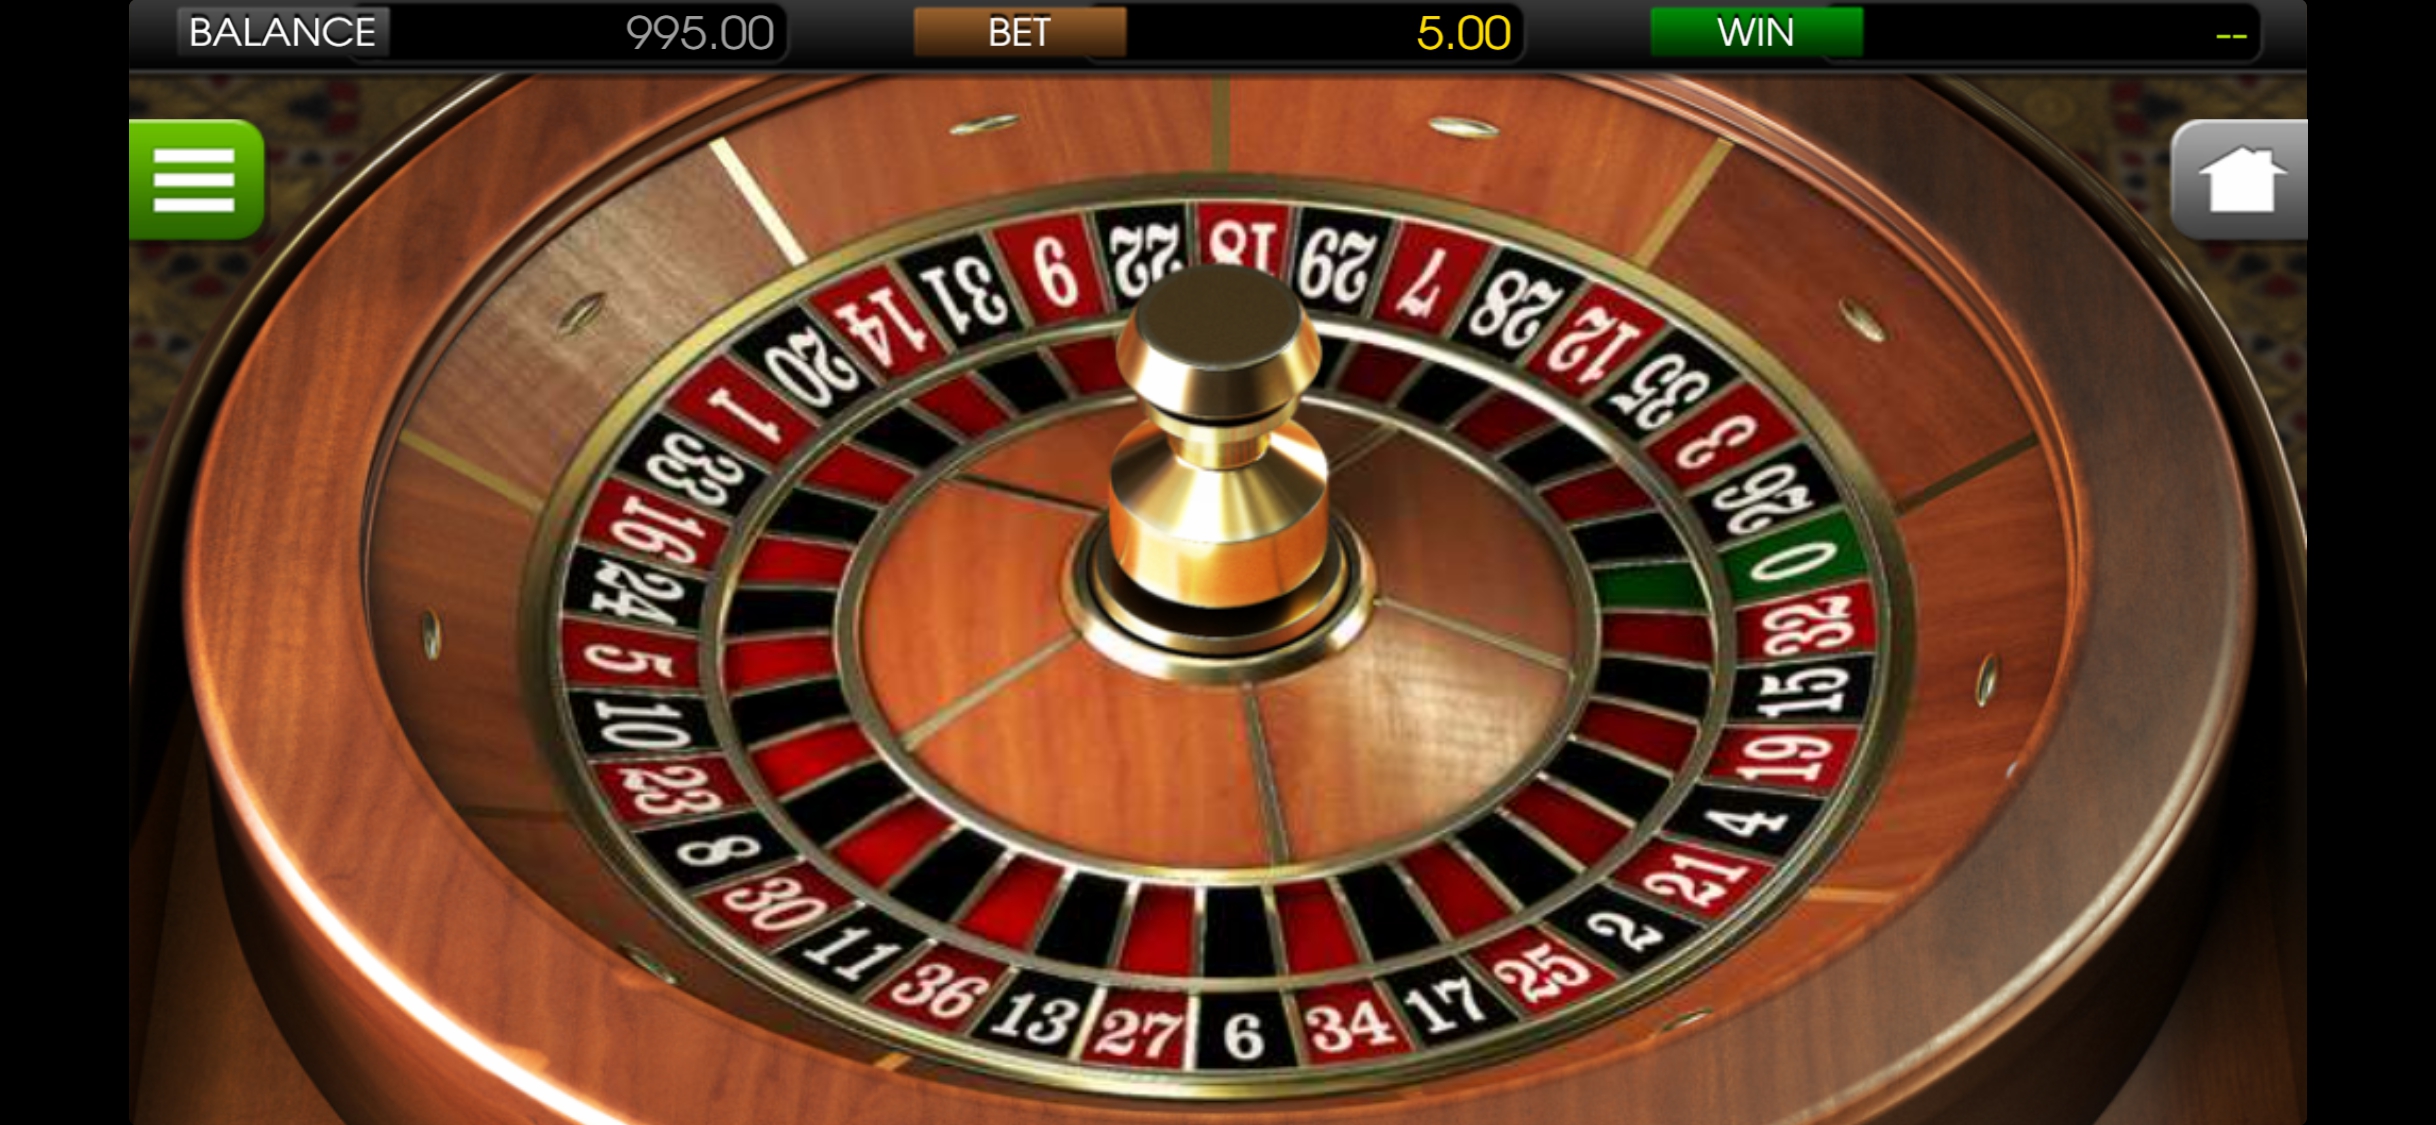 Universal Slots Mobile Casino Games Review